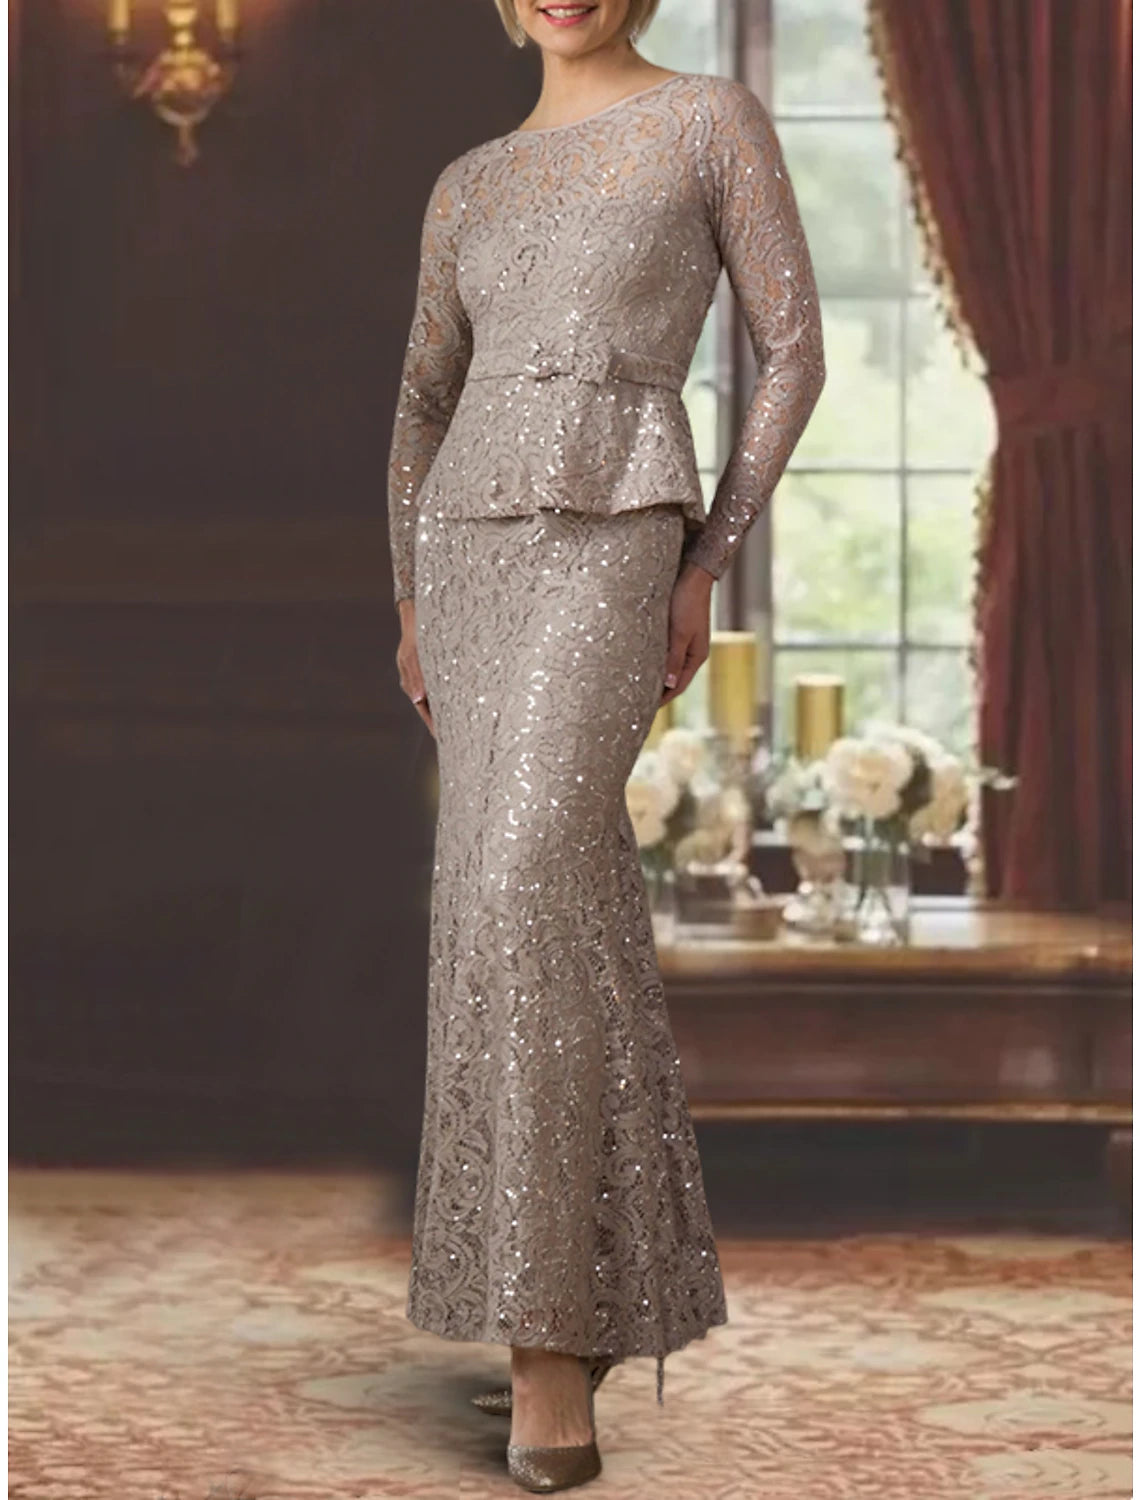 Sheath / Column Mother of the Bride Dress Formal Wedding Guest Elegant Scoop Neck Floor Length Tea Length Lace Charmeuse Sequined Long Sleeve with Appliques